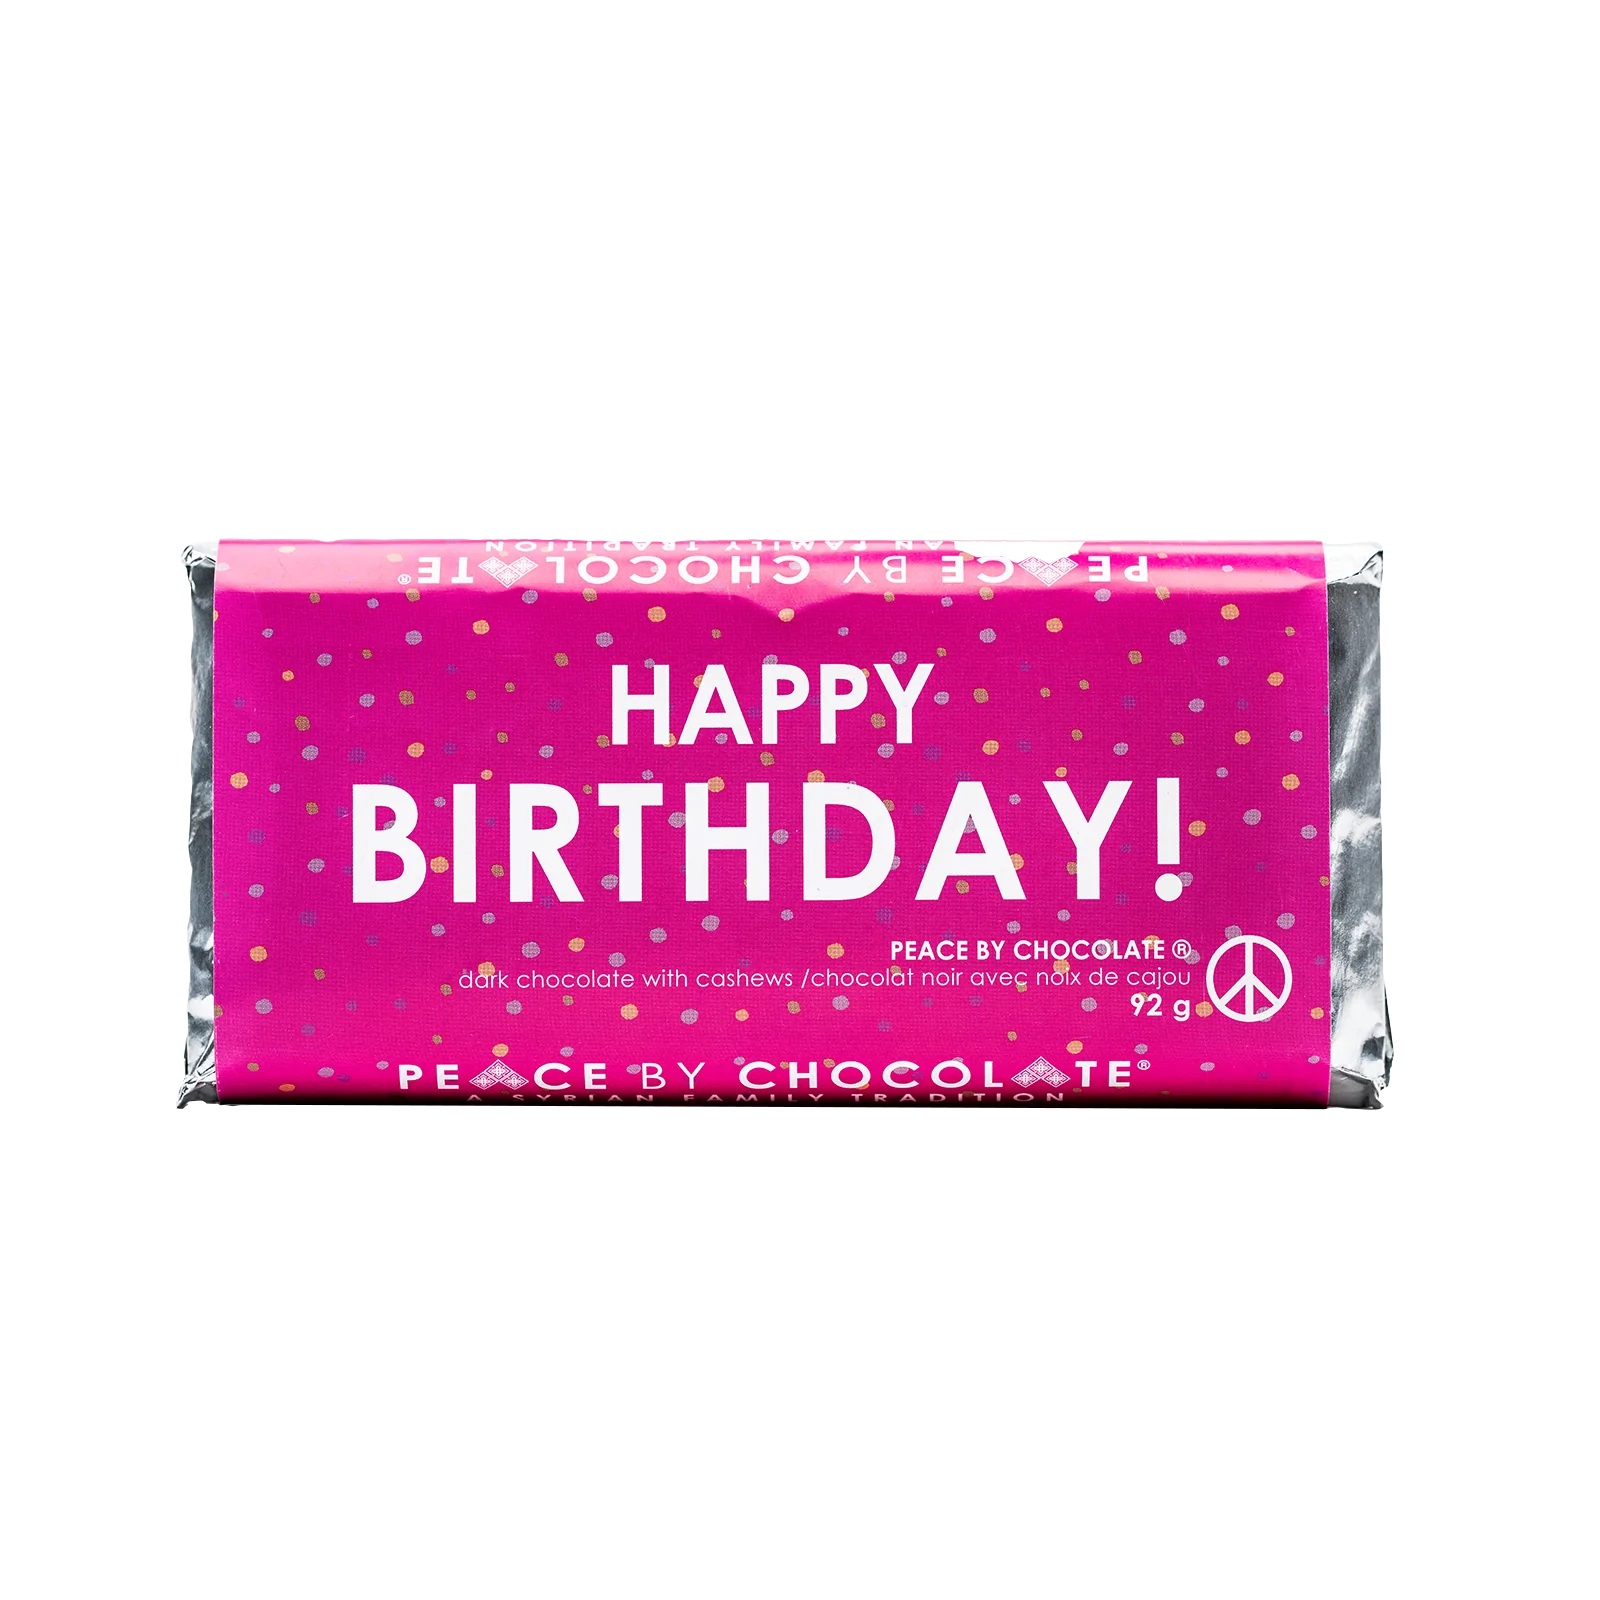 Peace by Chocolate-Occasions Chocolate Bar 92g